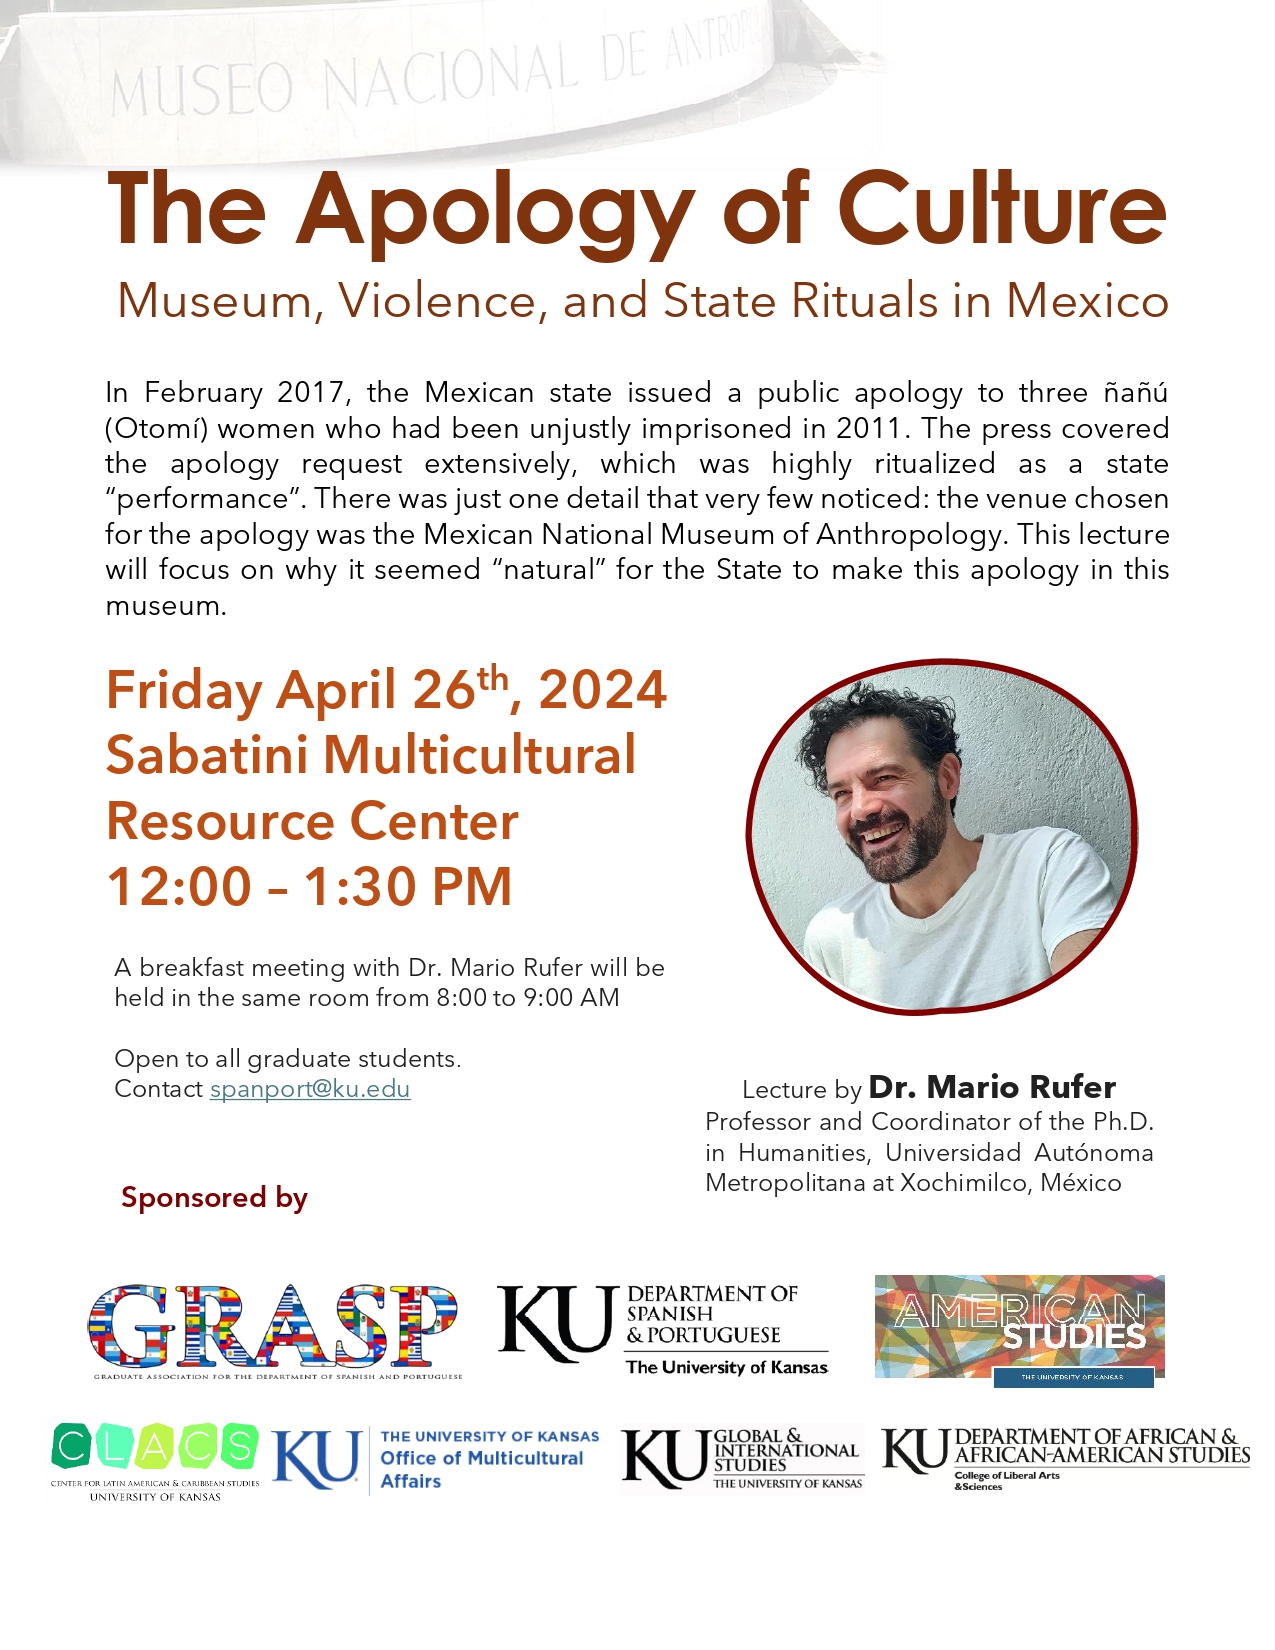 The Apology of Culture: Museum, Violence, and State Rituals in Mexico